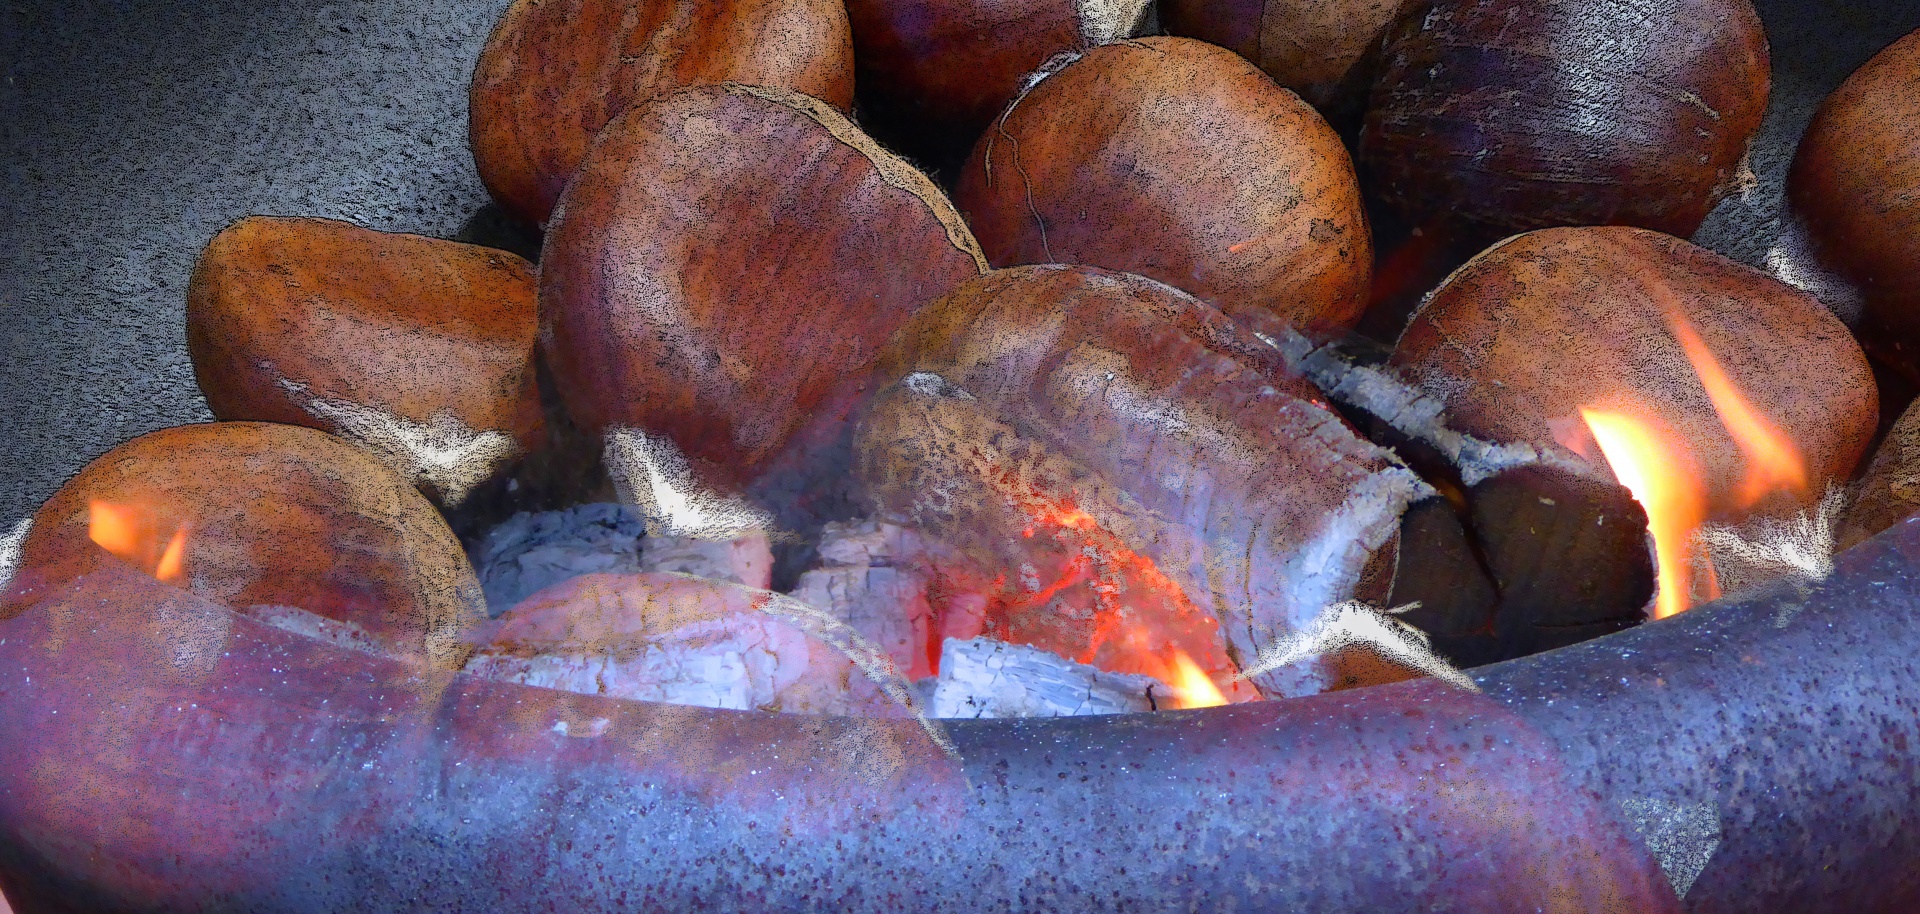 chestnuts roasted over open fire chestnuts christmas free photo